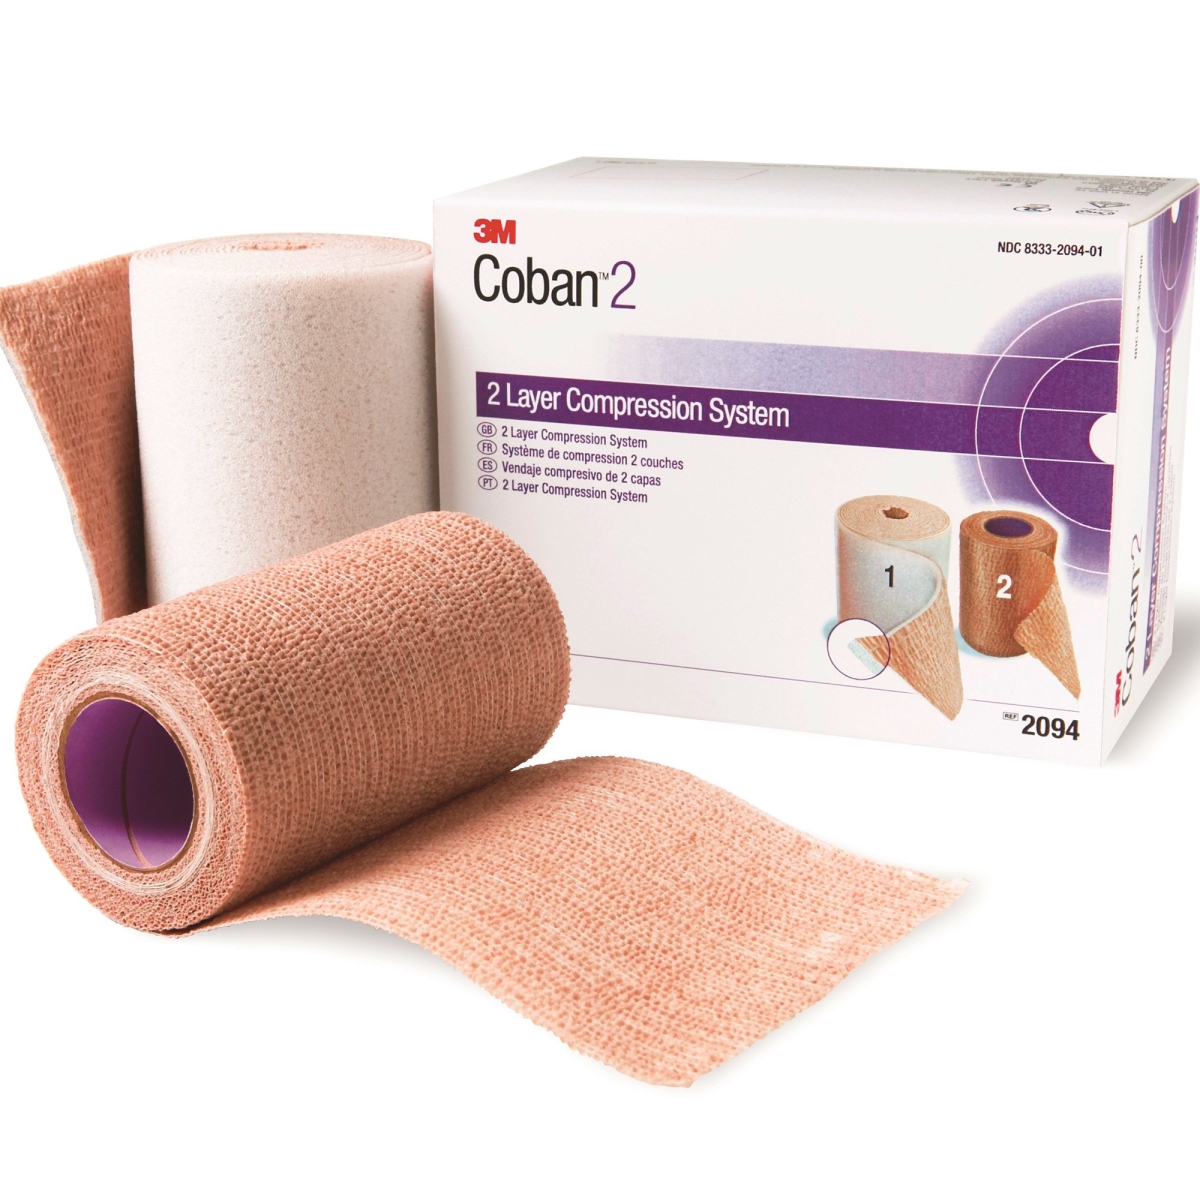 Picture of 3M 29043000 Tan & White Coban2 Nonsterile 2 Layer Compression Bandage System&#44; 2.9 yardss x 4 in. - Pack of 8